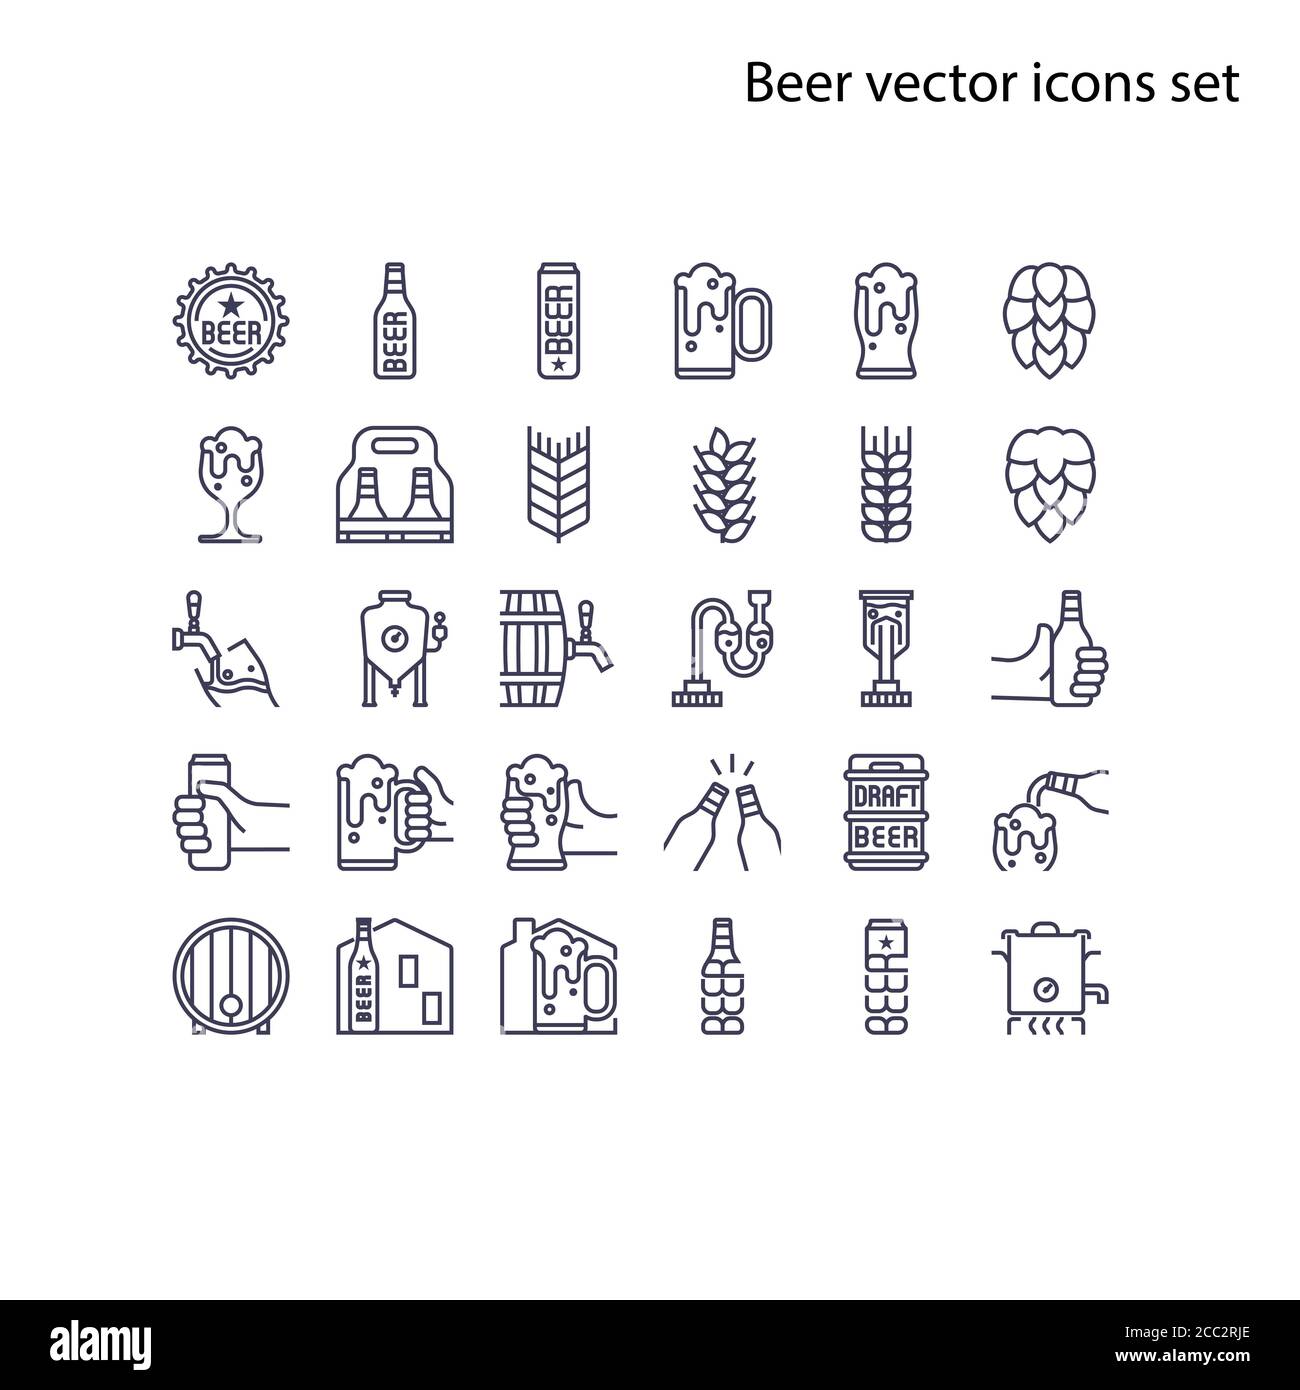 Basic element of Beer vector icons set.Contains a bottle, can, hop sign, barley and wheat, fermentation tank, boiler, draft beer keg, beer process, an Stock Vector